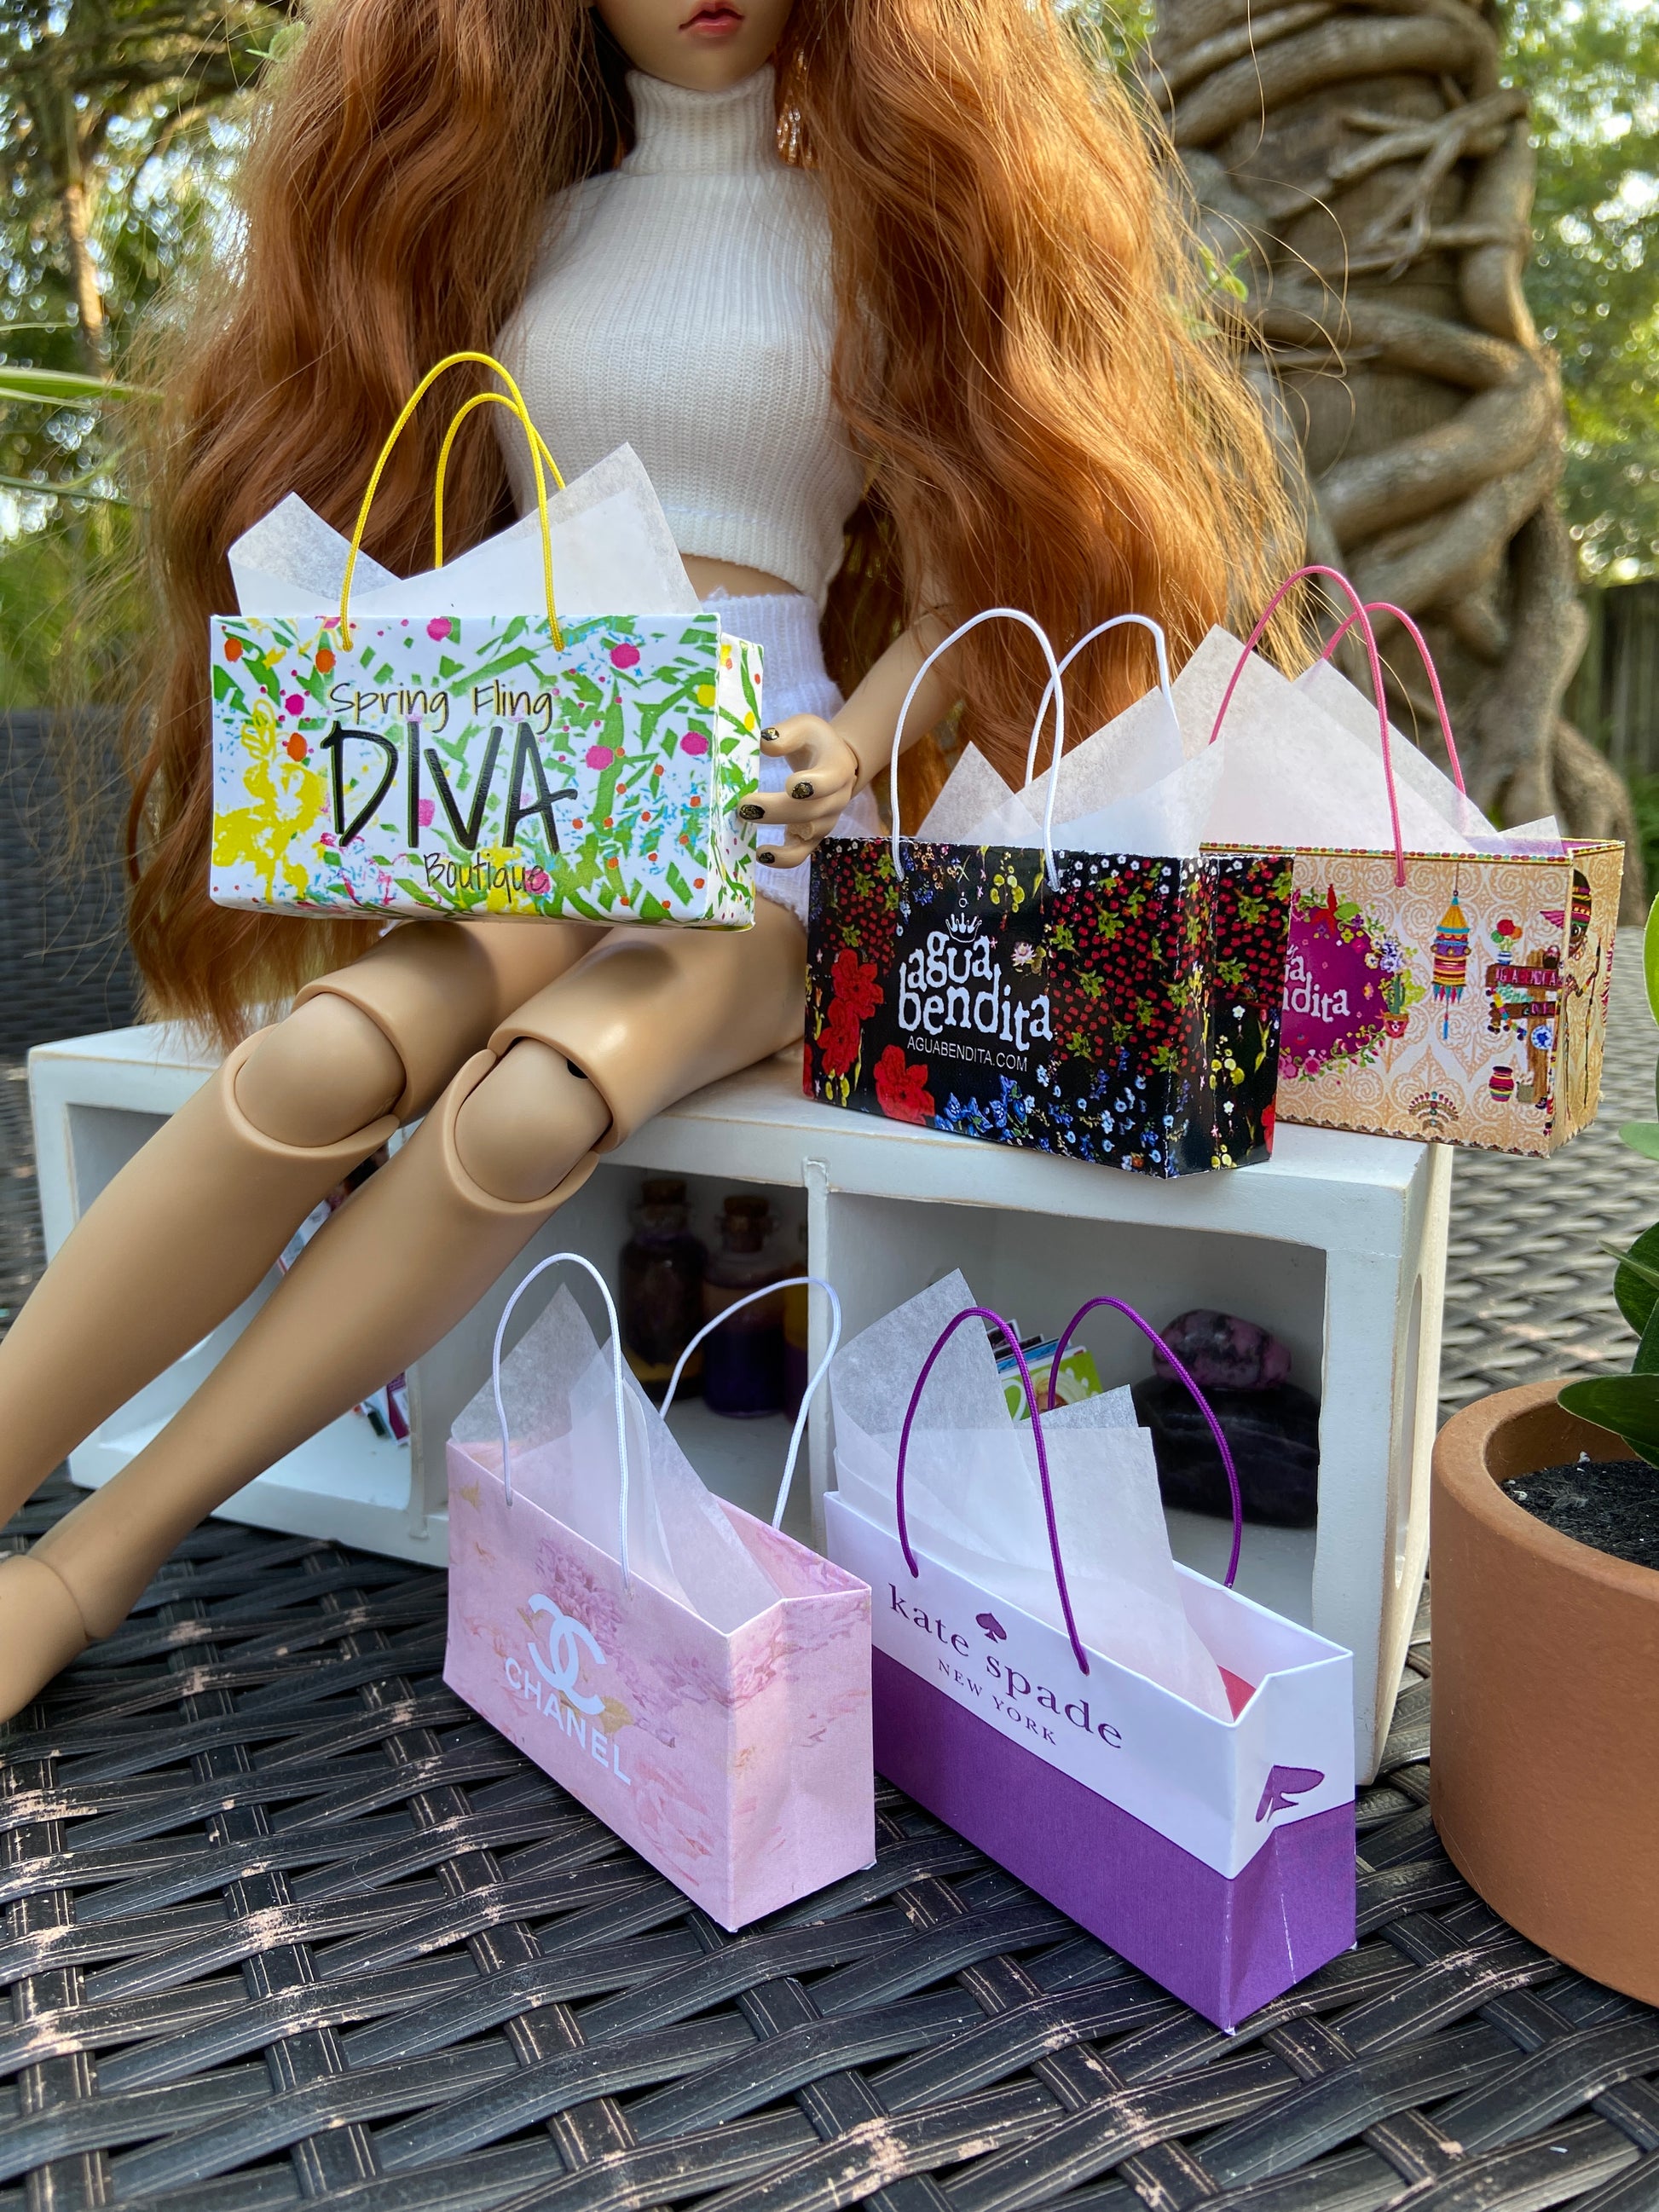 SET OF 5 Miniature Shopping Bags for Fashion Dolls – Art Color Dolls